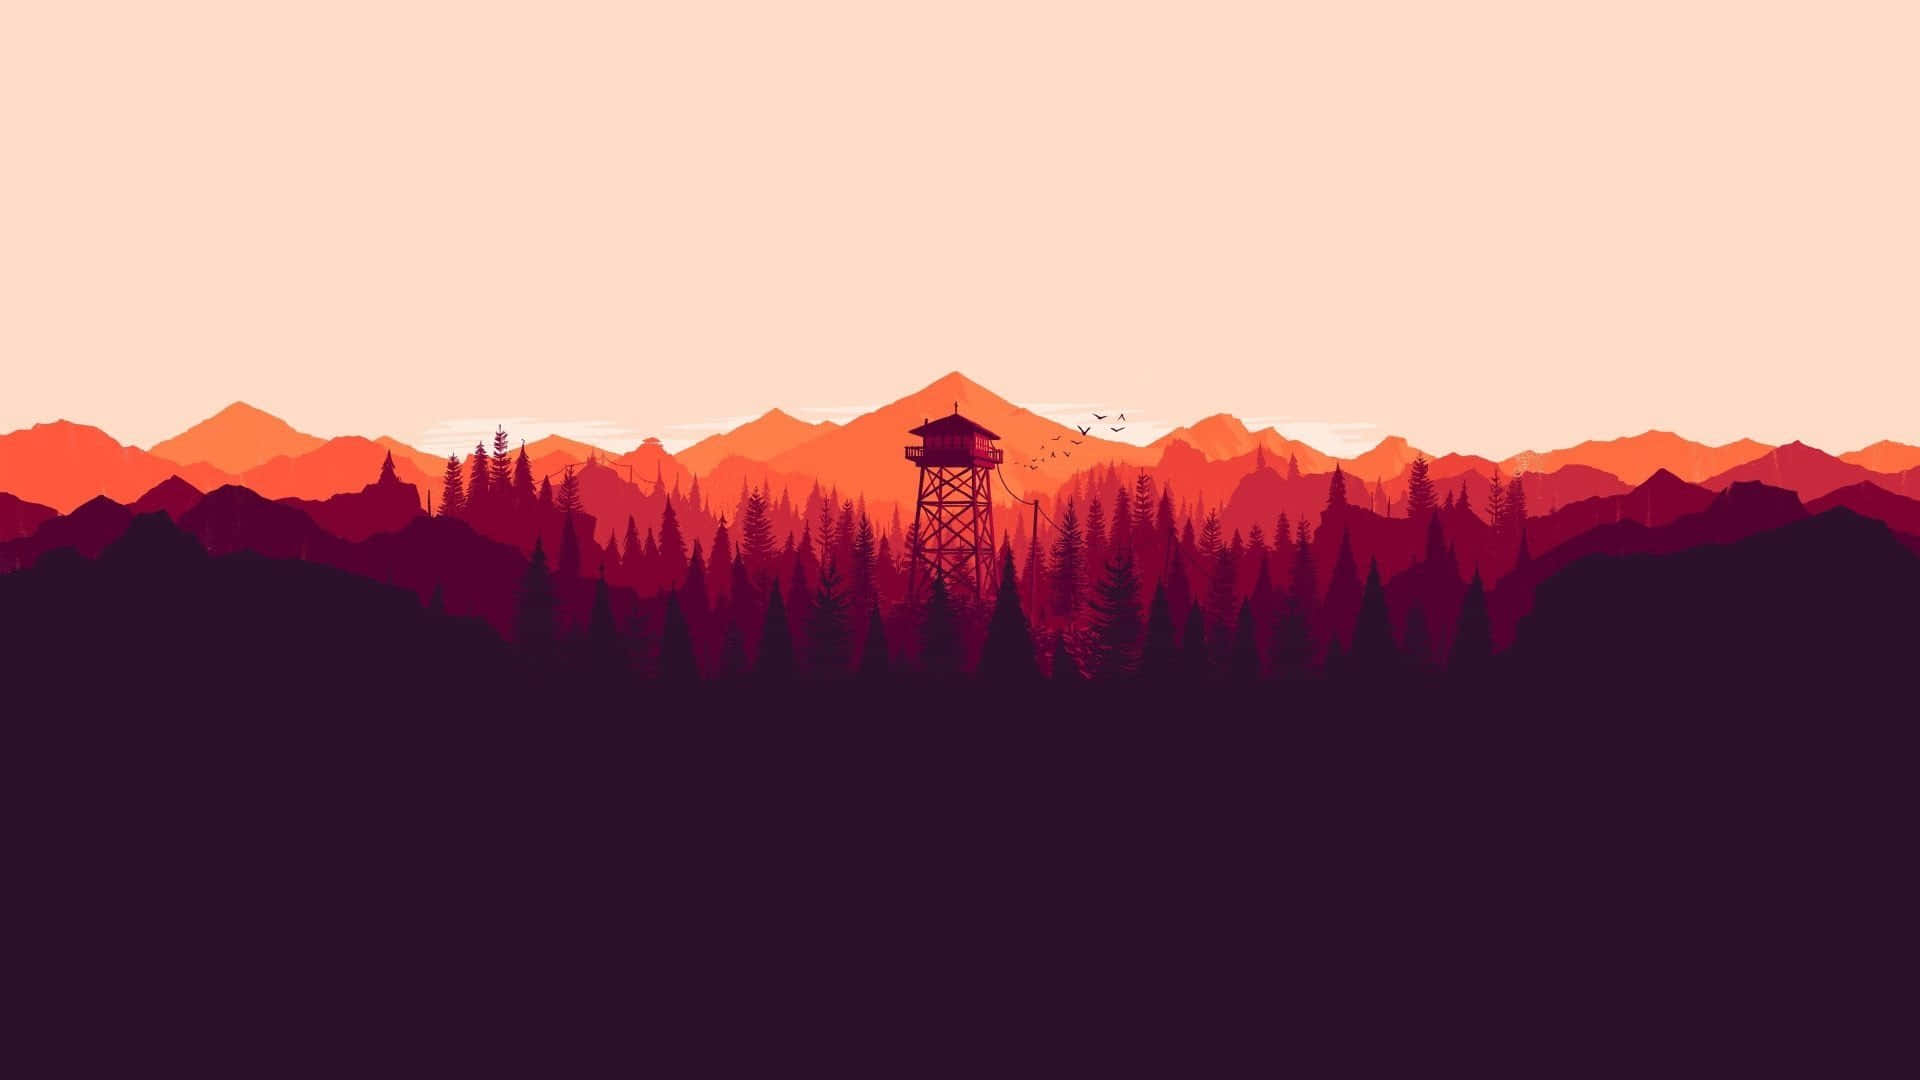 Enjoy the peaceful view of the Firewatch forest